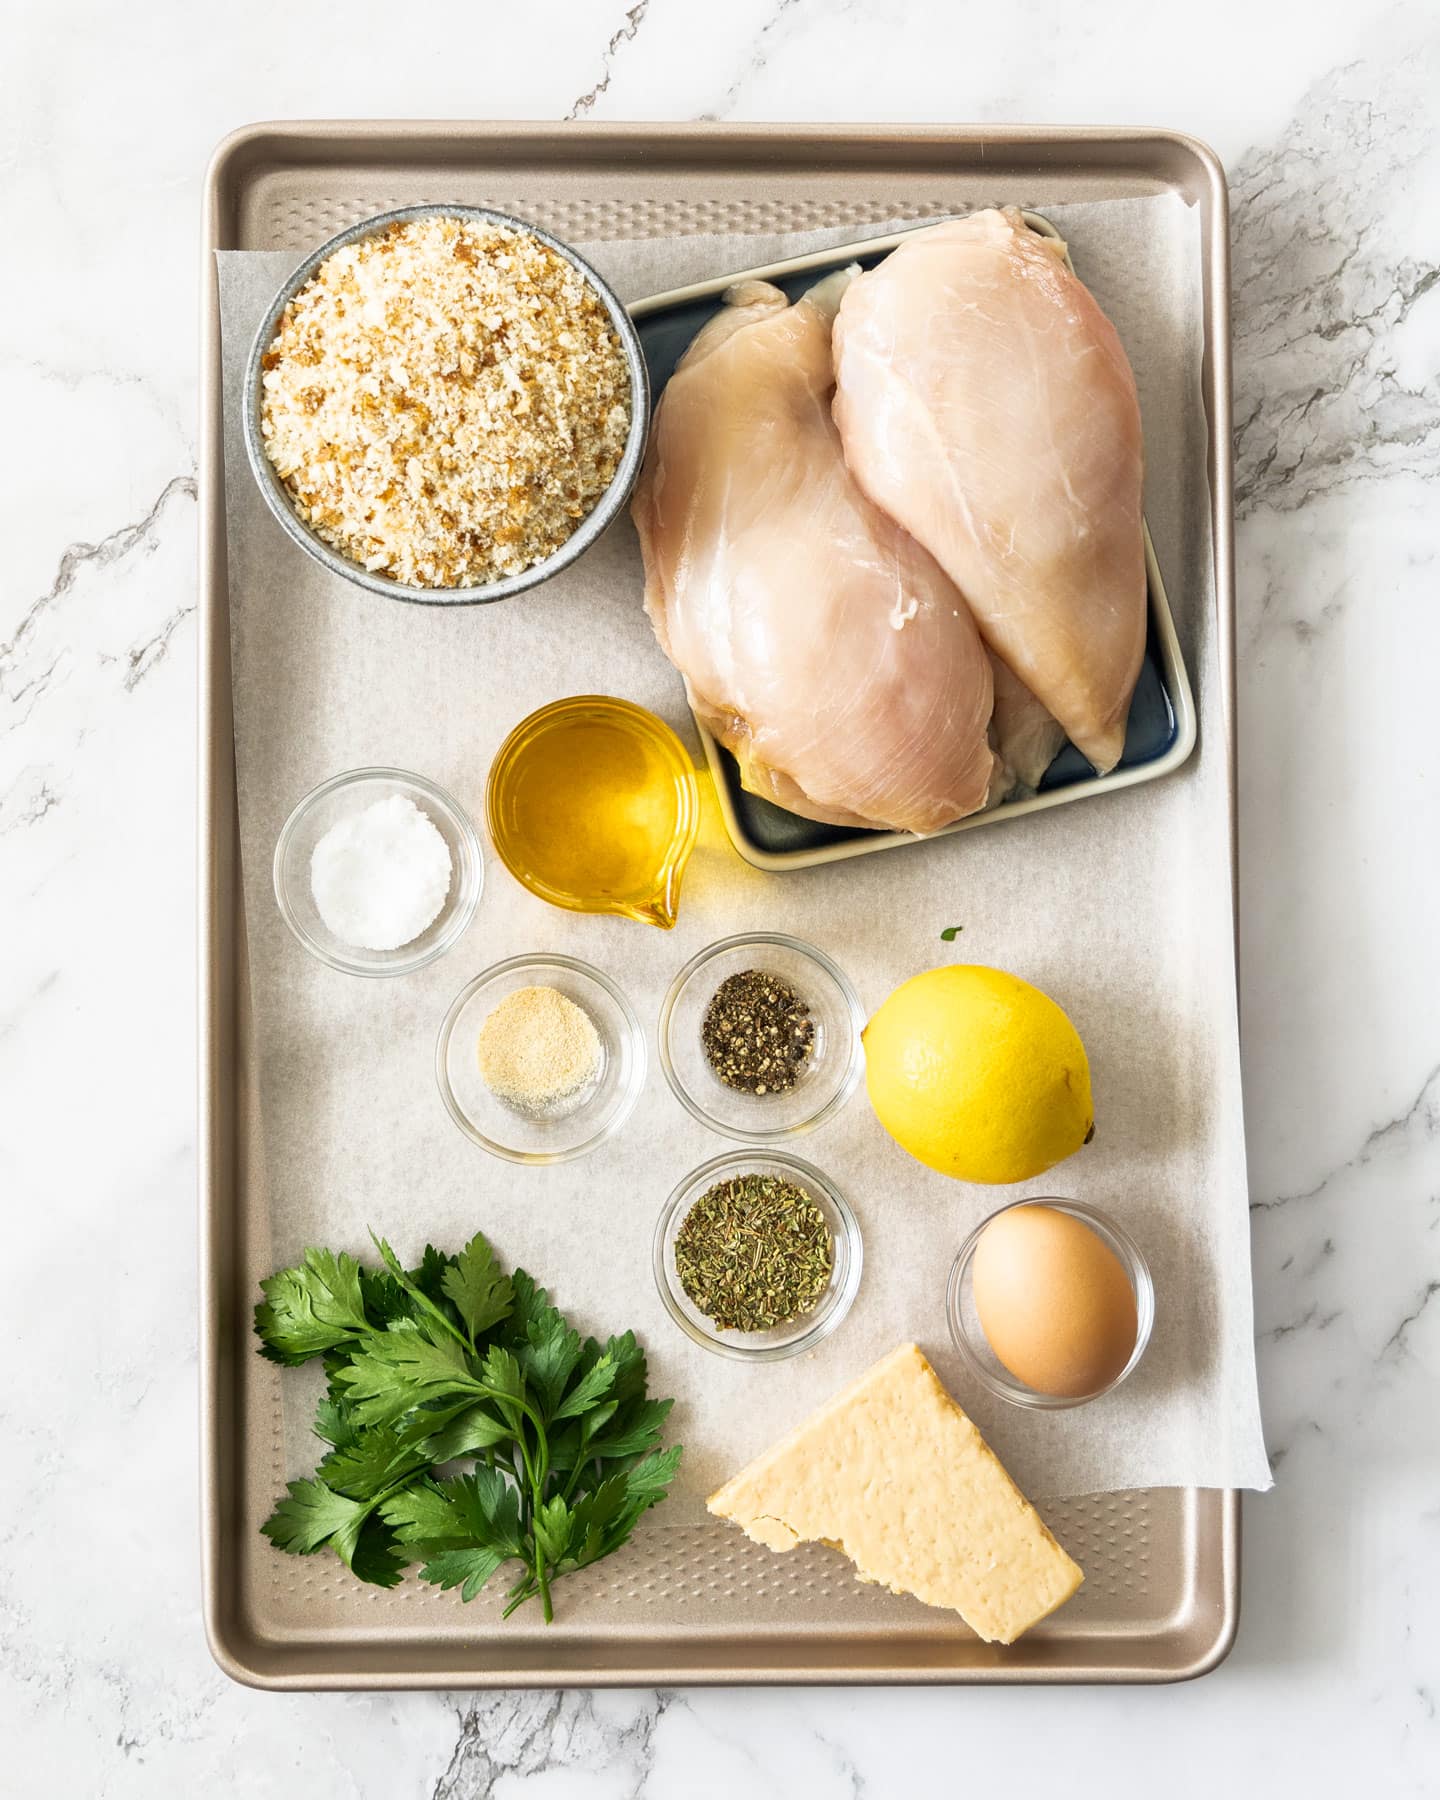 Ingredients for Italian chicken cutlets on a baking tray.